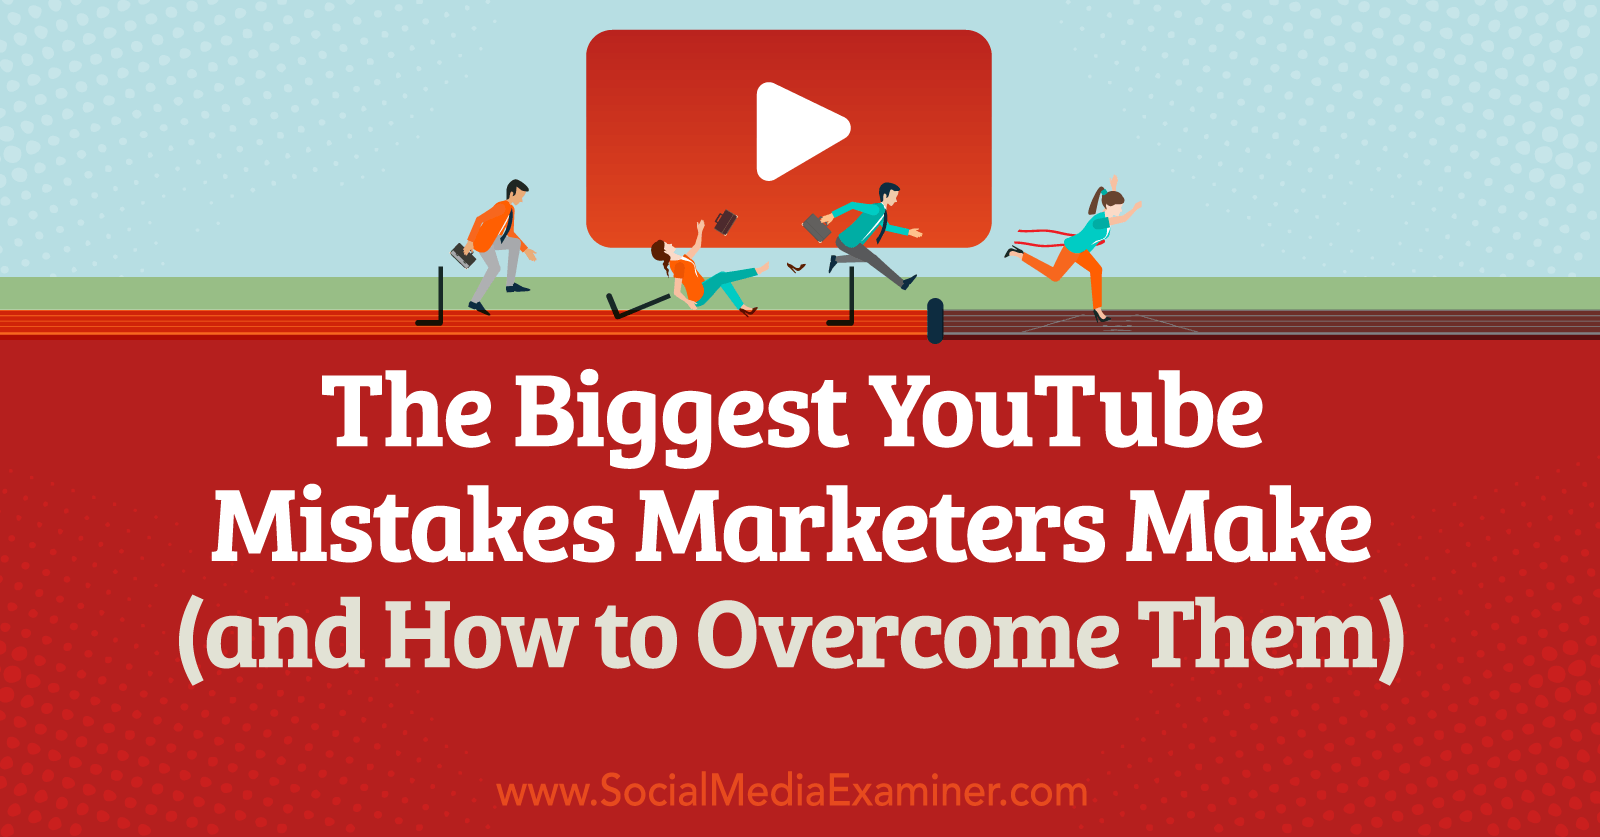 The Biggest YouTube Mistakes Marketers Make (and How to Overcome Them)-Social Media Examiner